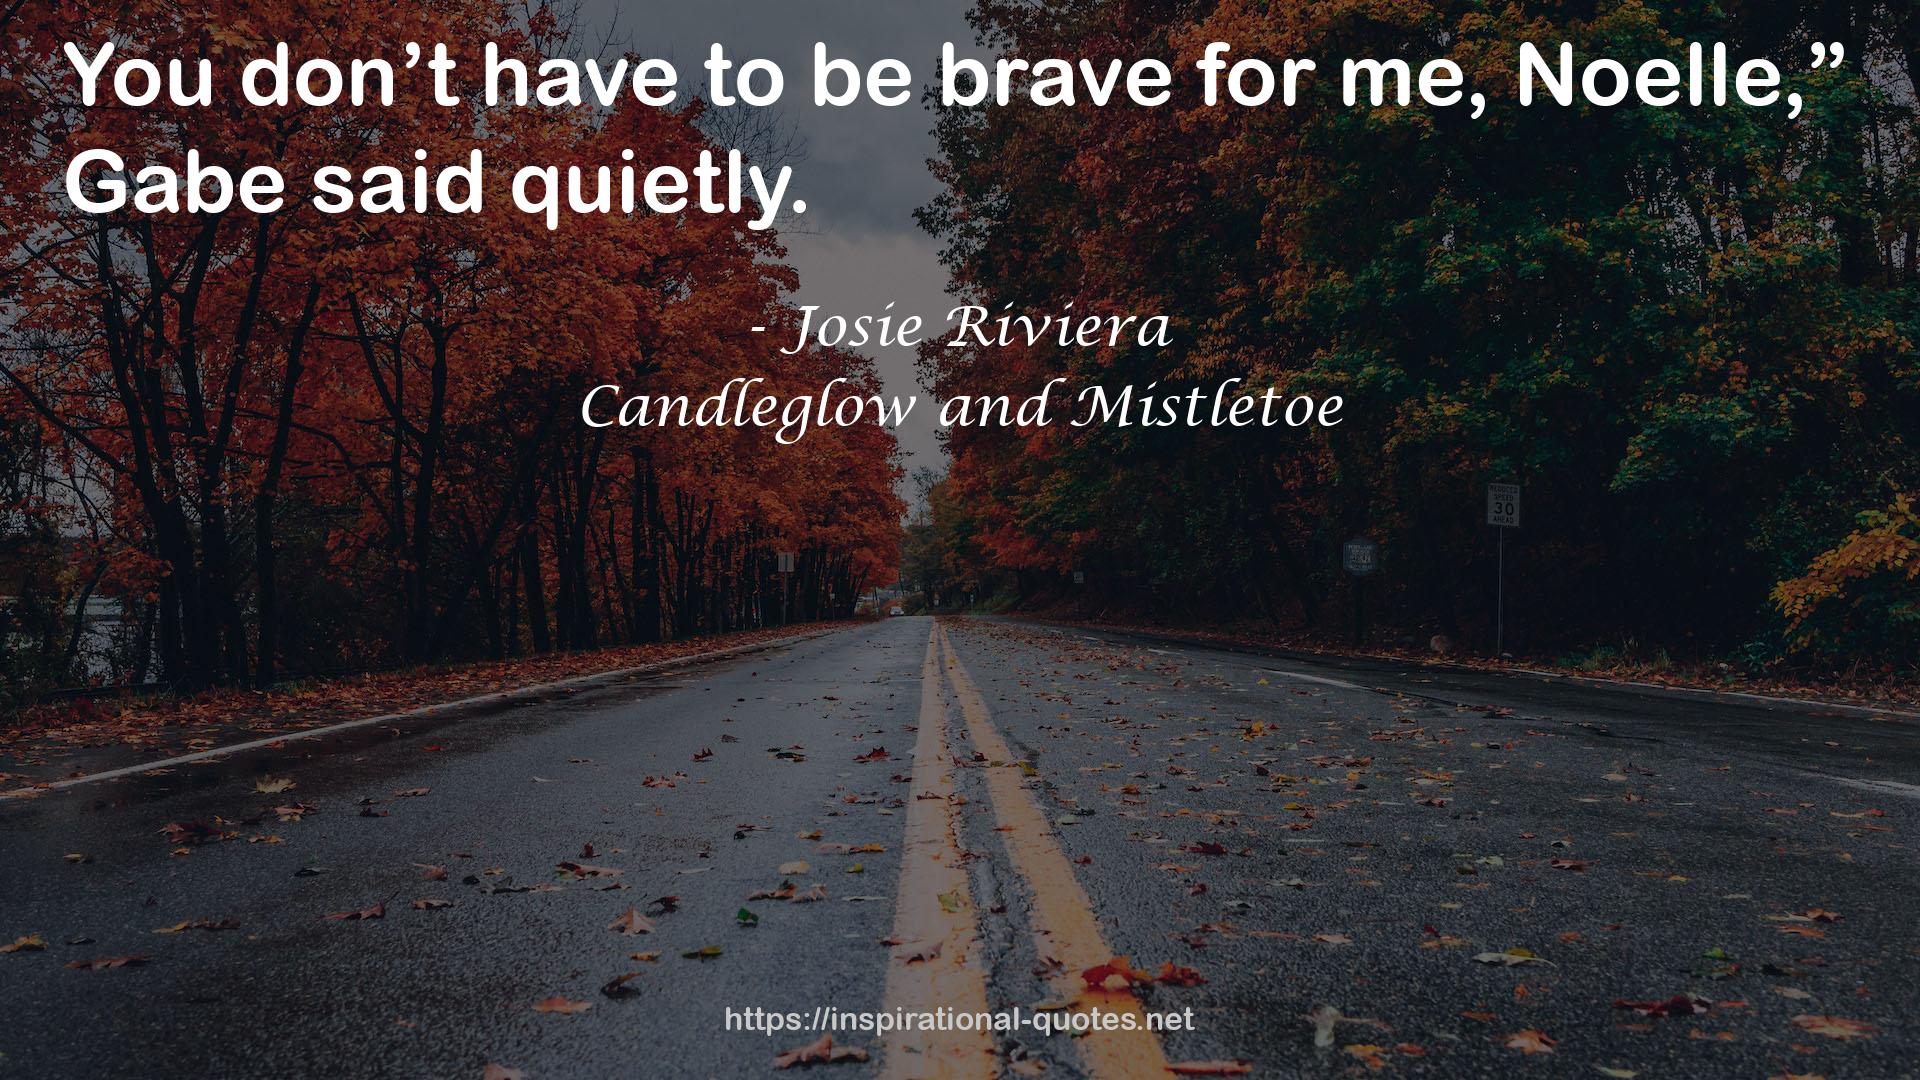 Candleglow and Mistletoe QUOTES